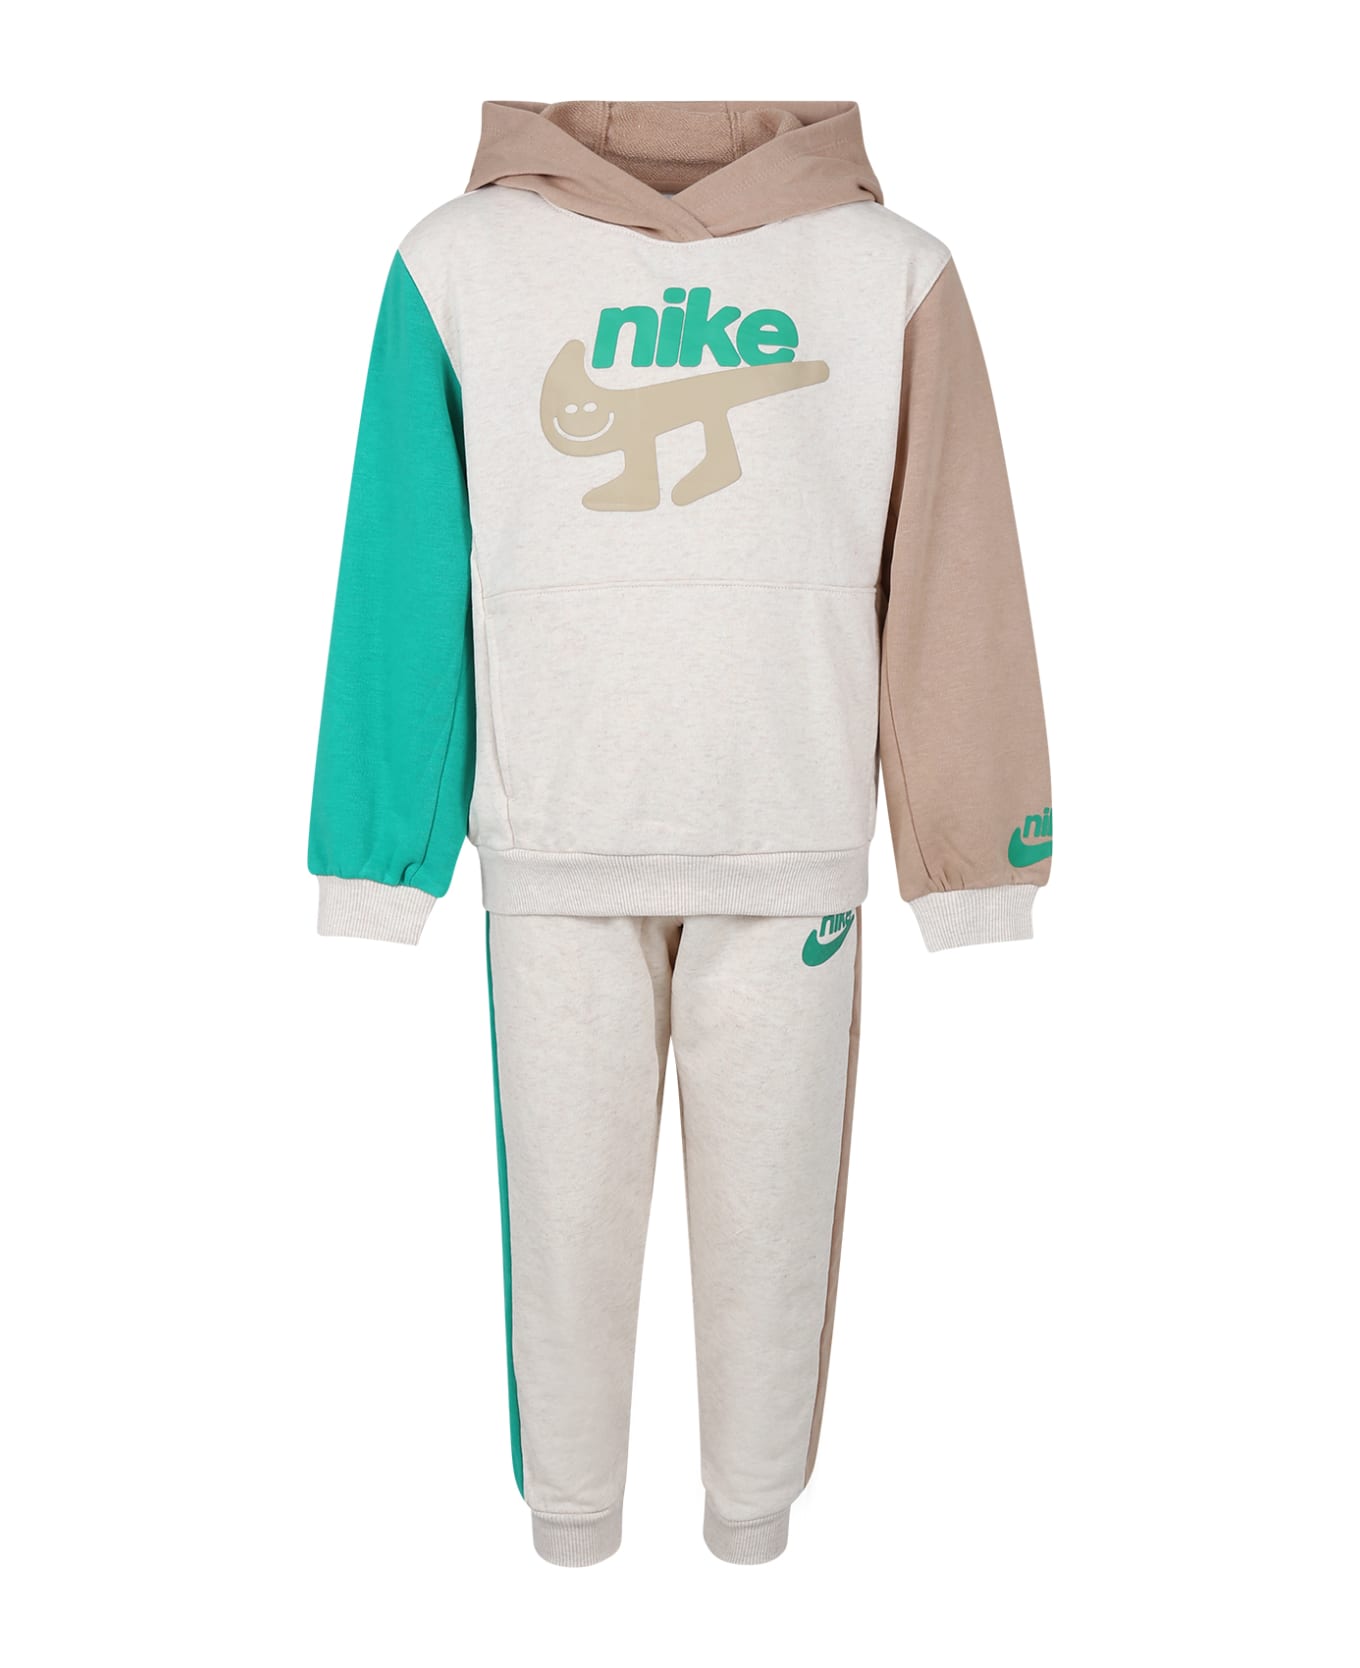 Nike Multicolored Set For Boy With Logo - Multicolor